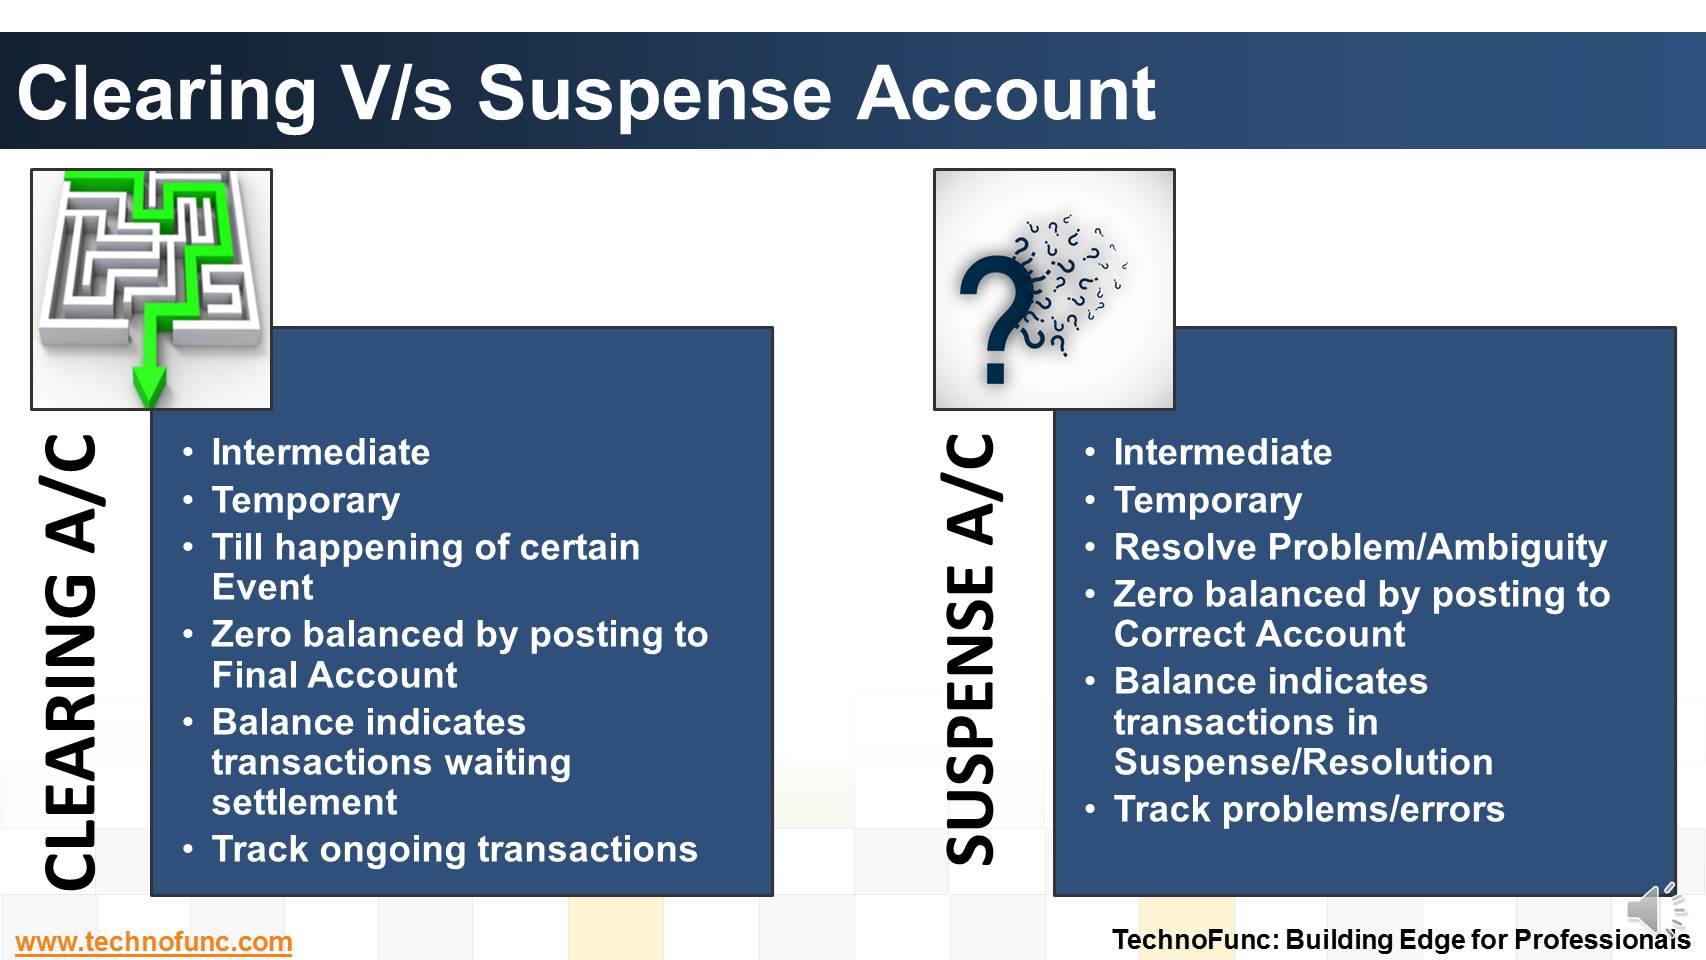 Clearing V/s Suspense Account